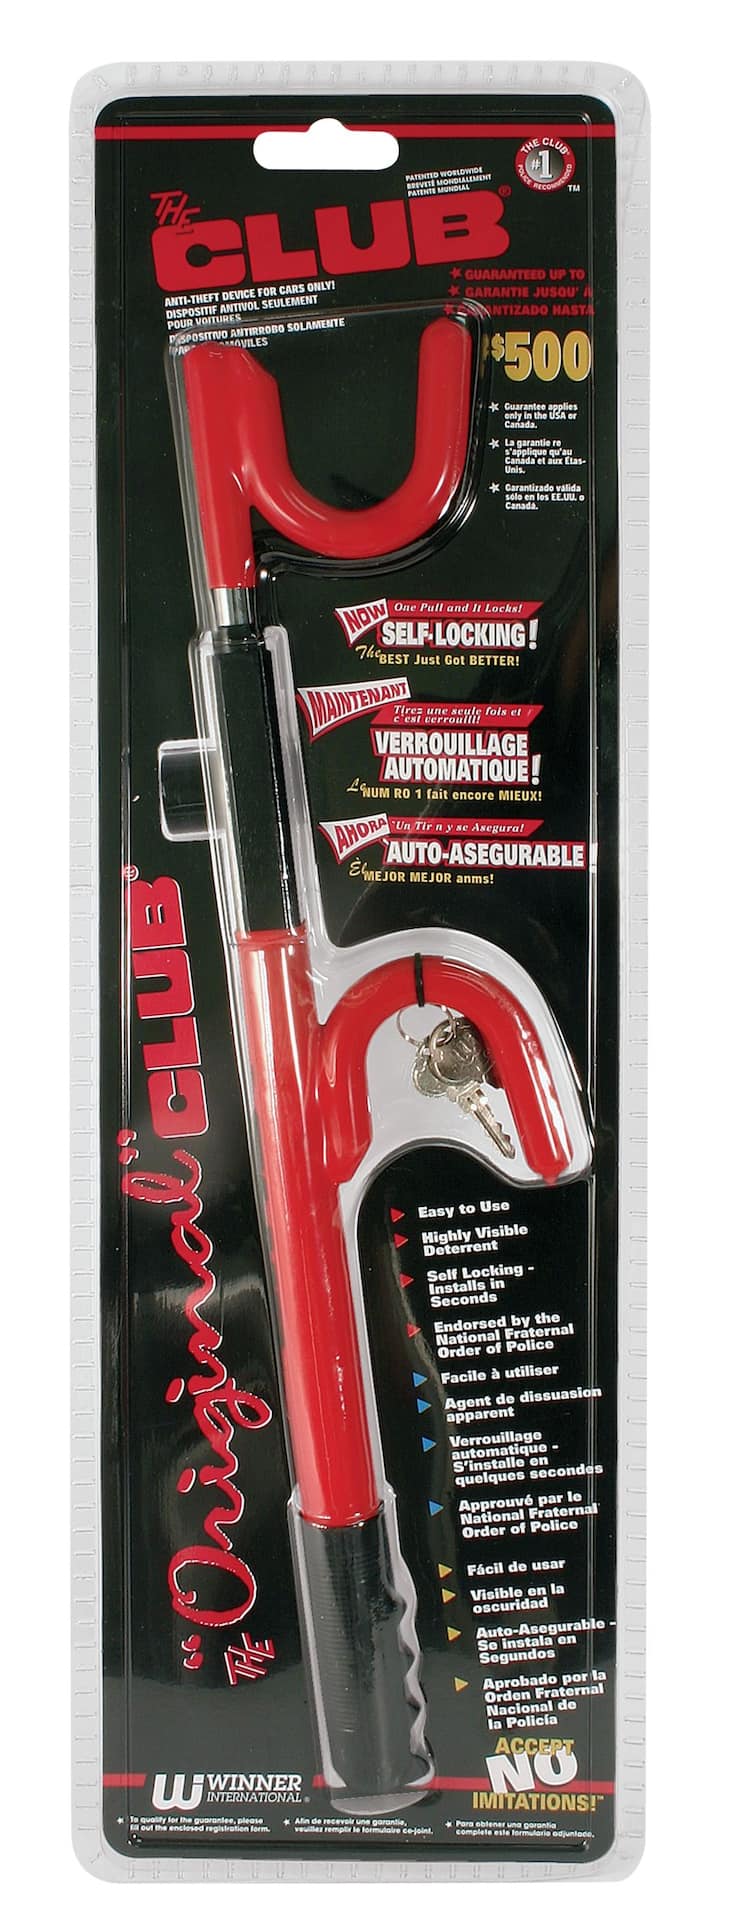 https://media-www.canadiantire.ca/product/automotive/car-care-accessories/auto-accessories/0340643/the-club-red-anti-theft-device-41bc1b0a-97c2-47de-8397-364311b5f11e-jpgrendition.jpg